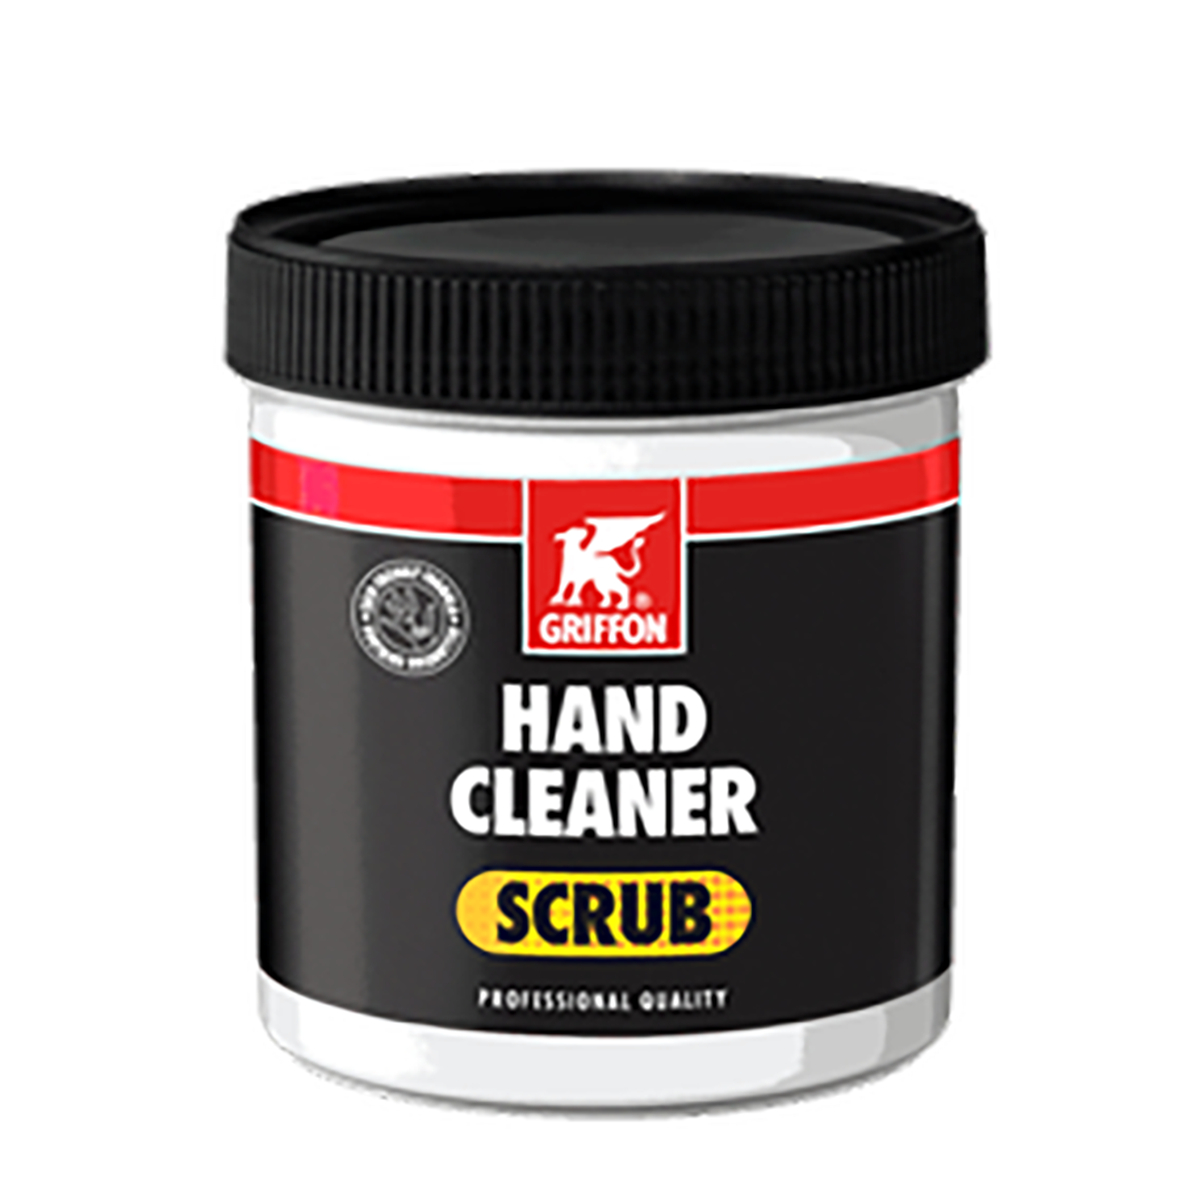 Hand Cleaner 425 g Hand Cleaner 425 g